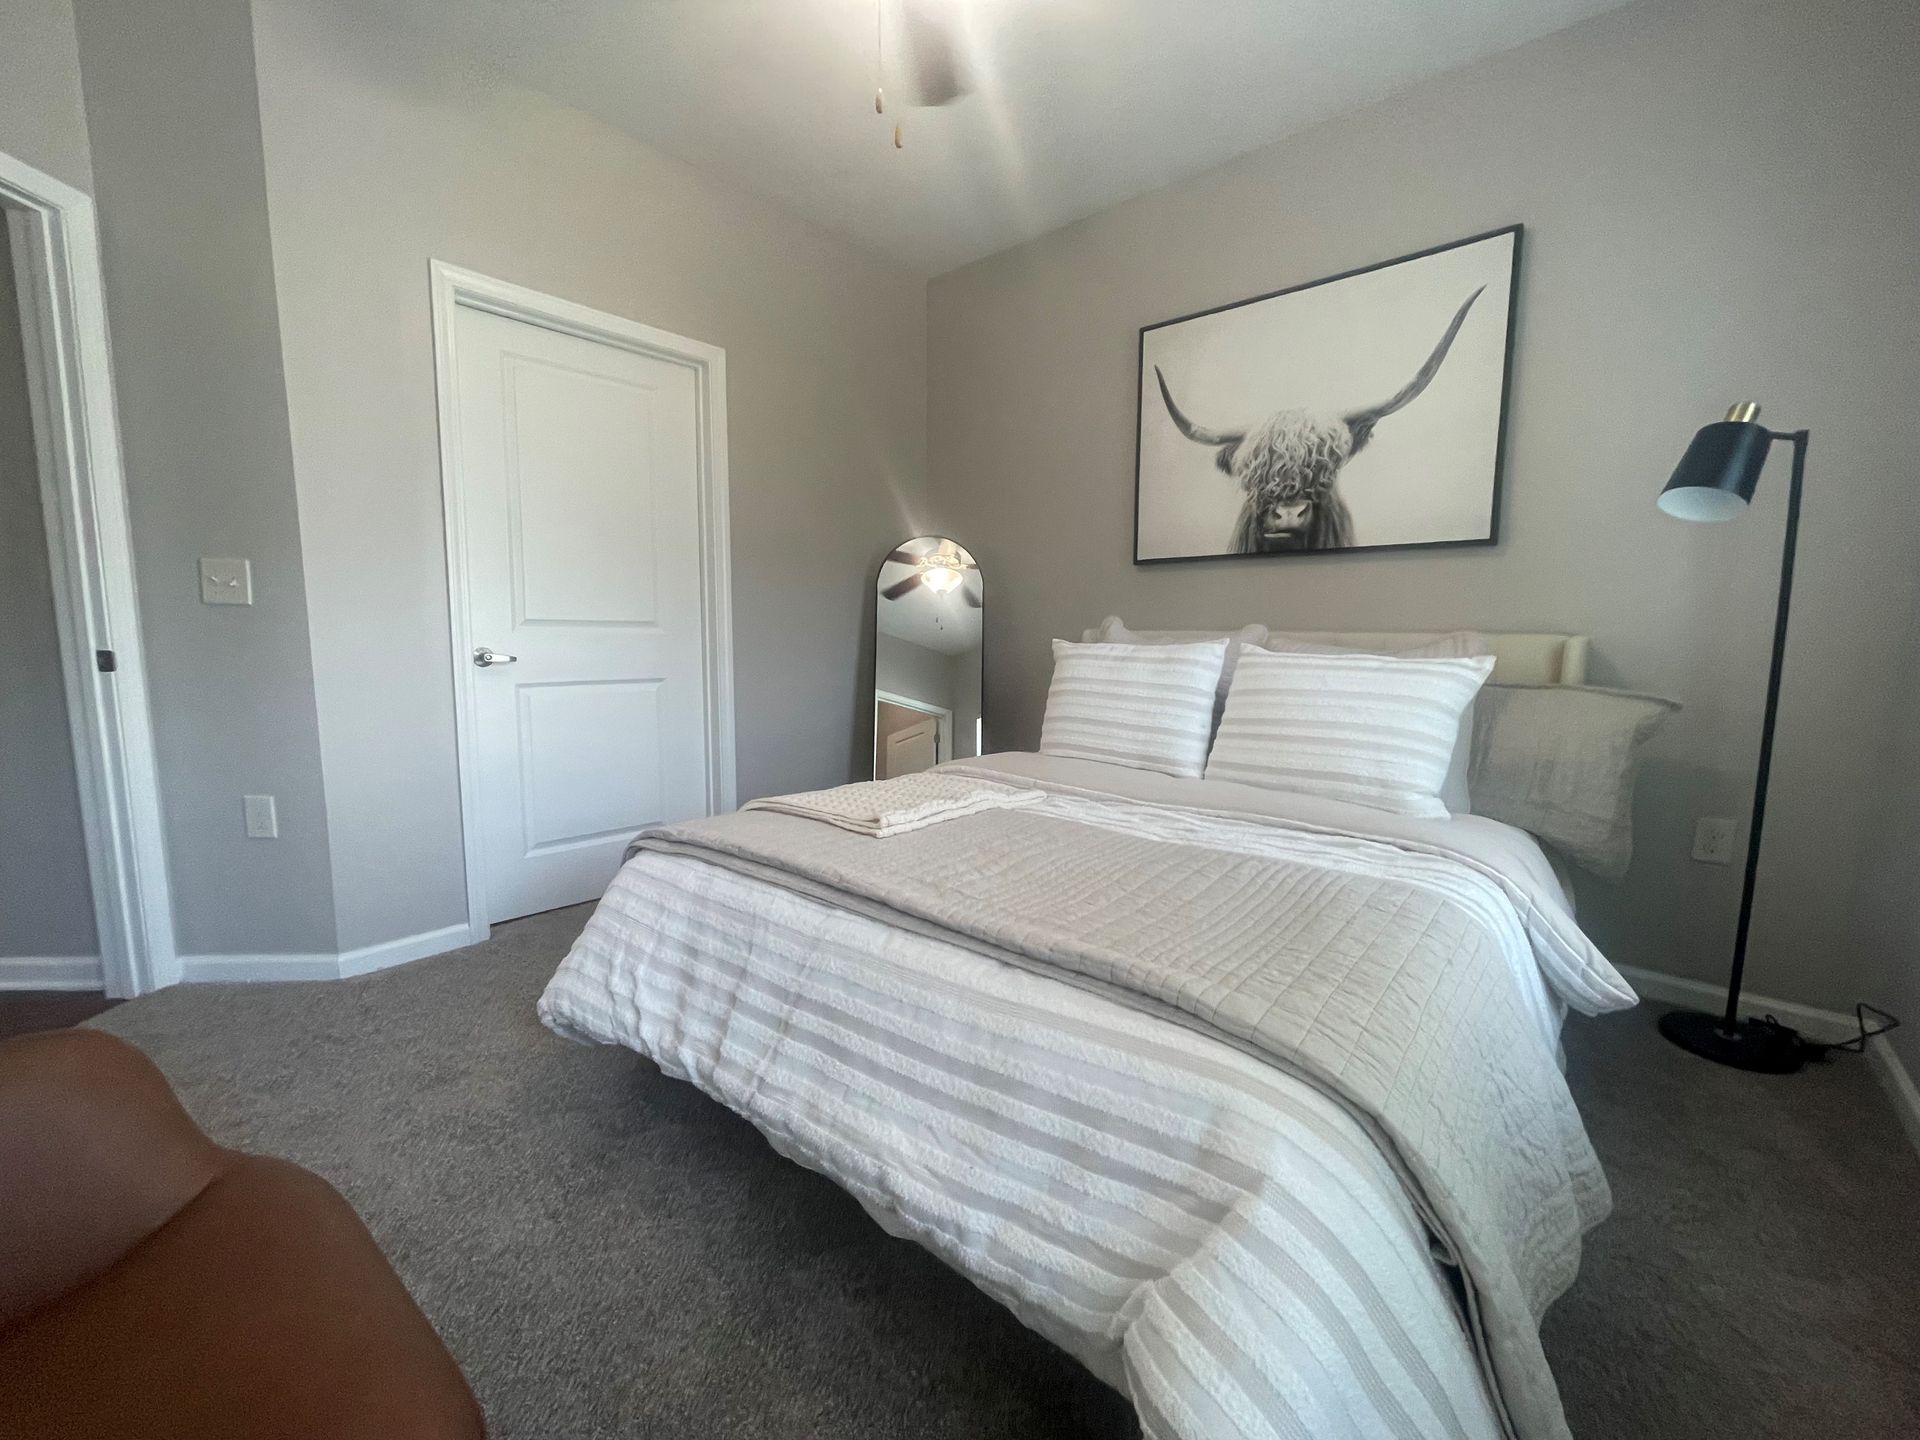 A bedroom with a bed and a picture of a bull on the wall at Thomaston Crossing.